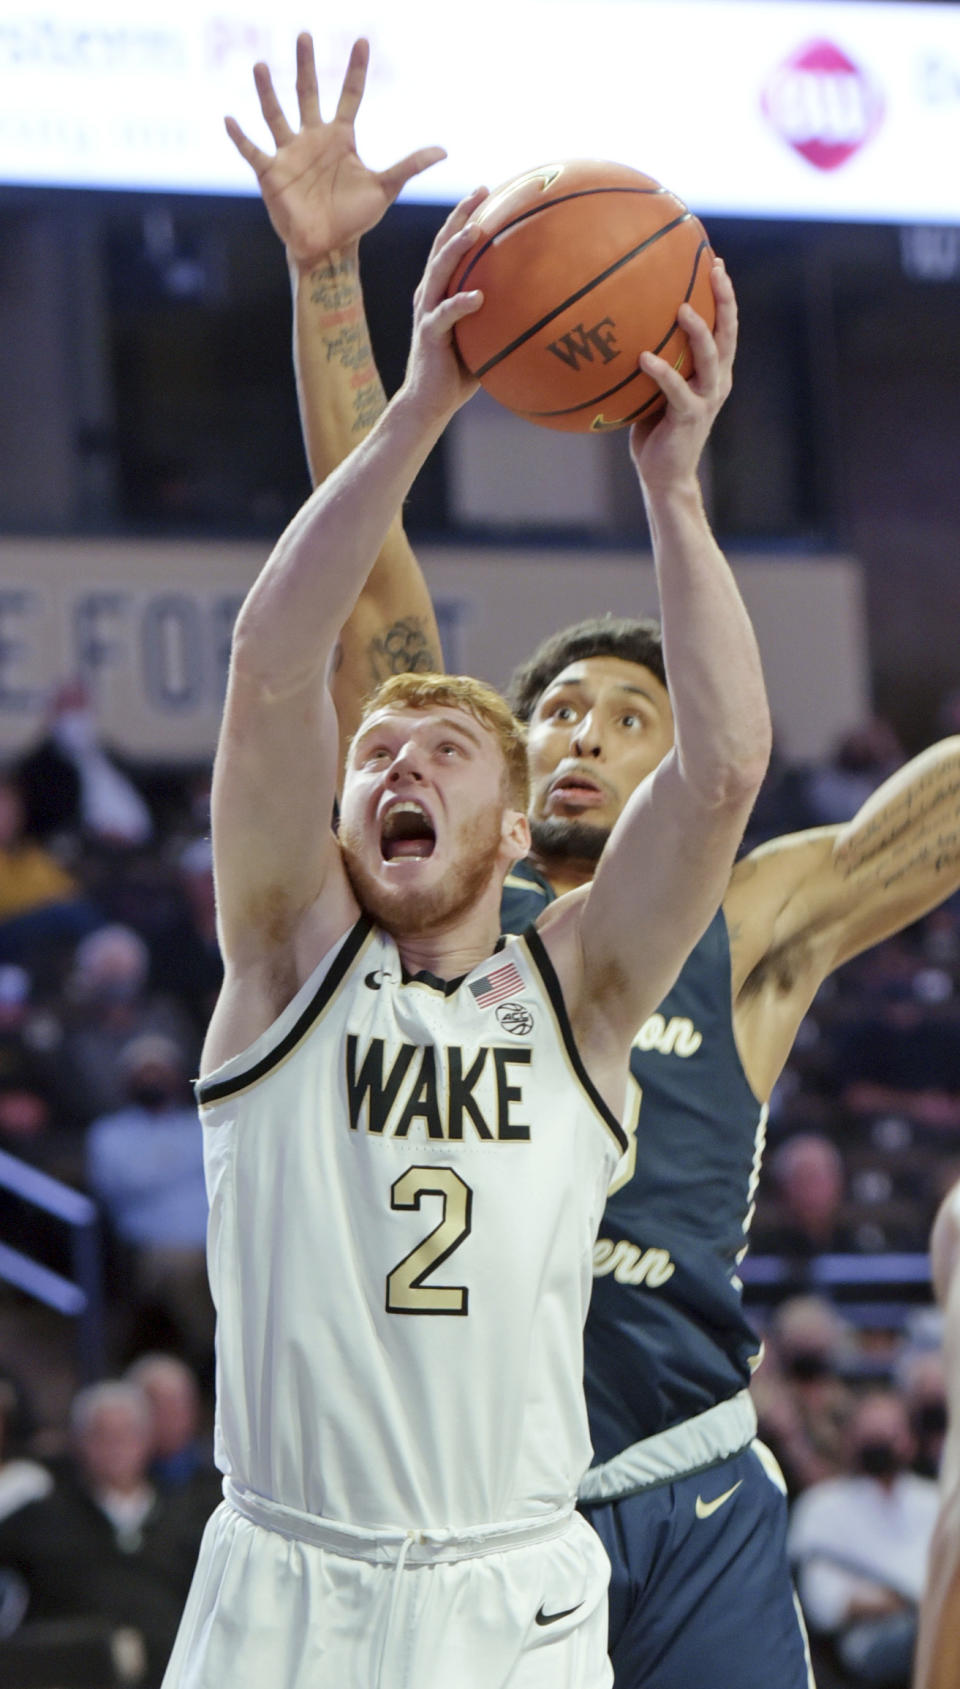 Wake Forest's Cameron Hildreth gets past Charleston Southern's Sean Price for a basket during the first half of an NCAA college basketball game Wednesday, Nov. 17, 2021, in Winston-Salem, N.C. (Walt Unks/The Winston-Salem Journal via AP)